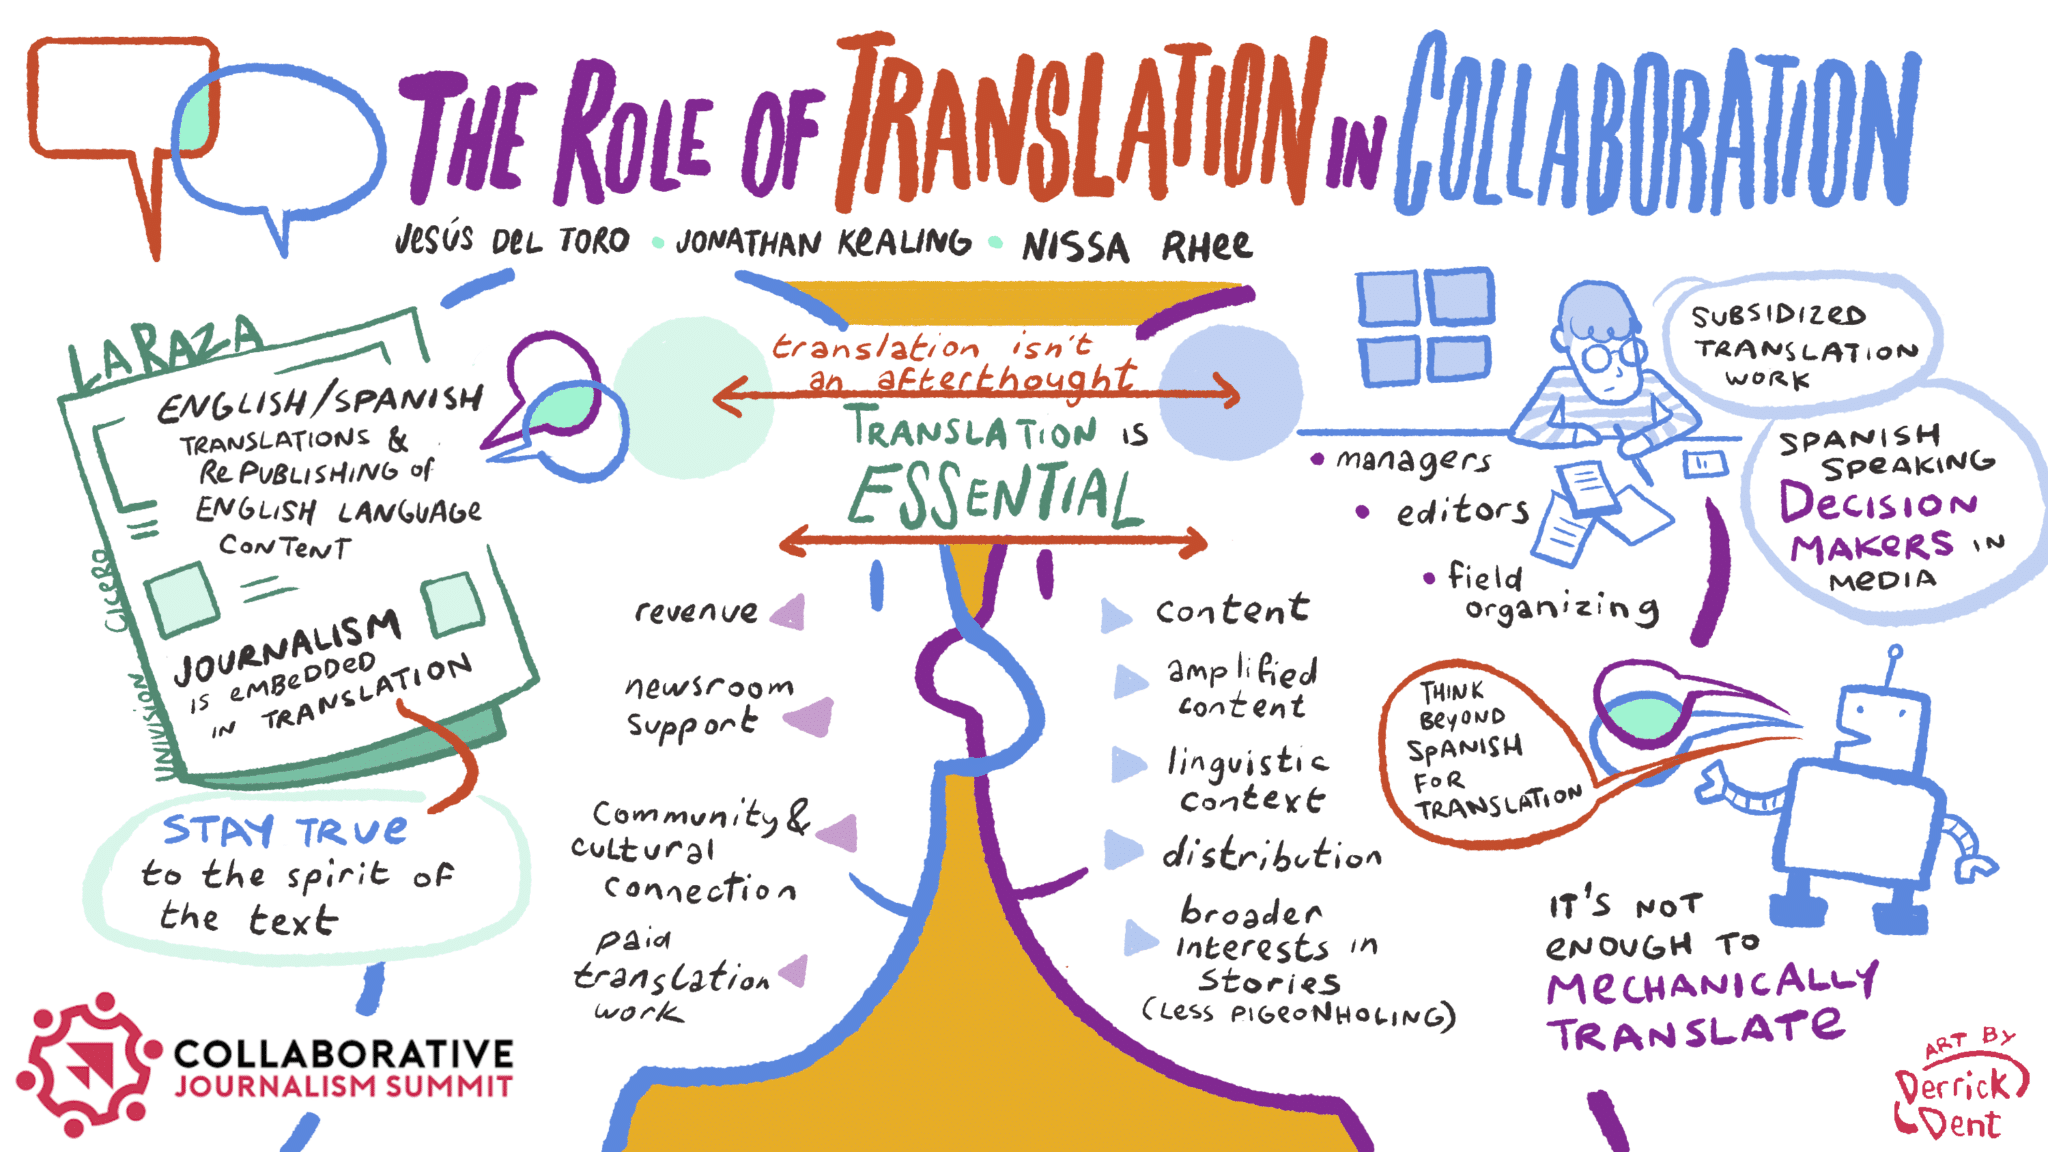 A graphic illustration from a discussion about the role of translation in collaborative journalism features cartoon drawings of people working together surrounded by relevant words and concepts from the discussion.